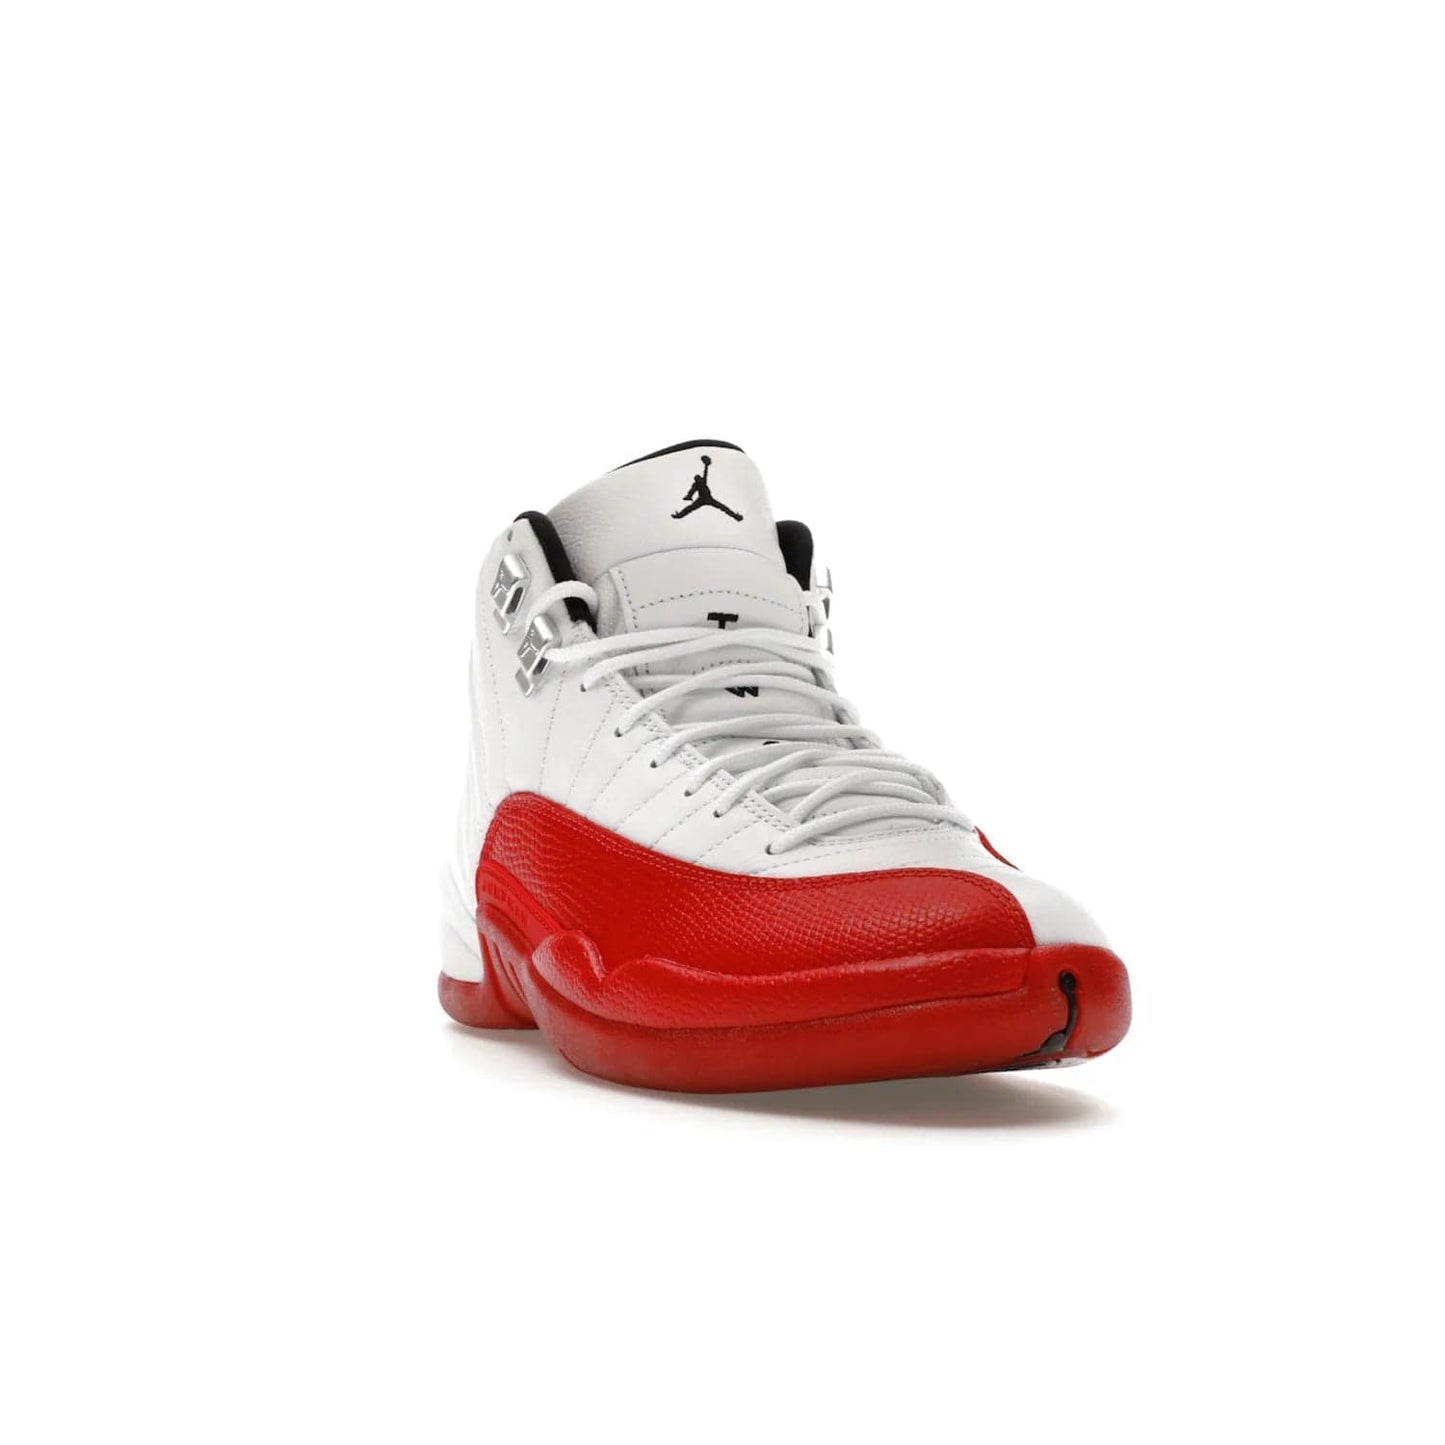 Jordan 12 Retro Cherry (2023) - Image 7 - Only at www.BallersClubKickz.com - Live your sneaker legend with the Jordan 12 Retro Cherry. Iconic pebbled leather mudguards, quilted uppers, and varsity red accents make this 1997 classic a must-have for 2023. Shine on with silver hardware and matching midsoles, and bring it all together for limited-edition style on October 28th. Step into Jordan legacy with the Retro Cherry.